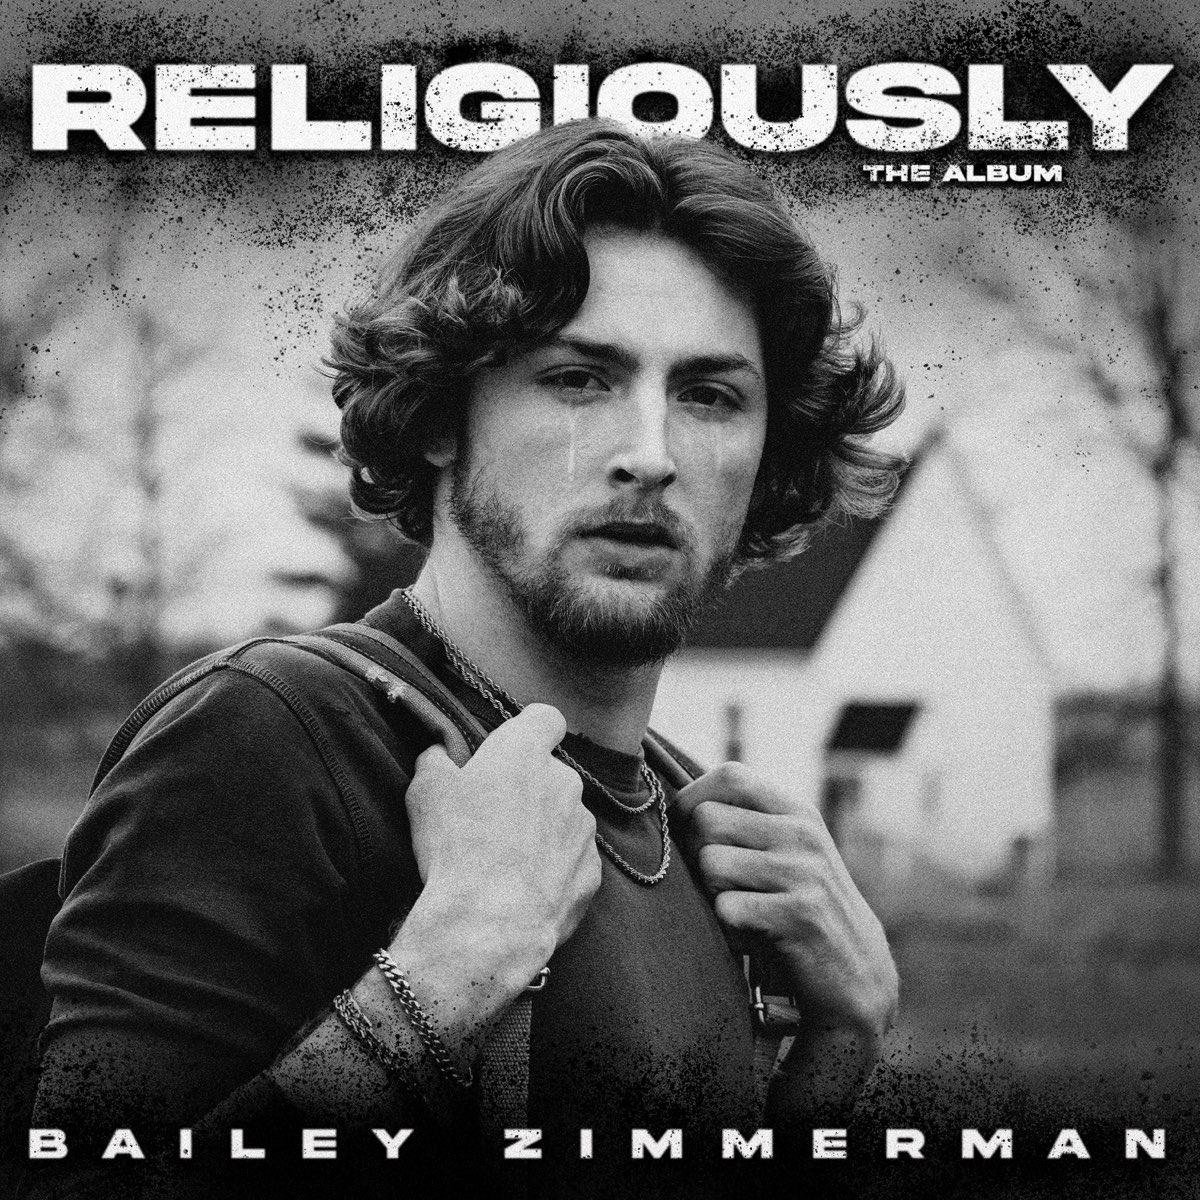 1200X1200Bf 60 Religiously. The Album. By Bailey Zimmerman